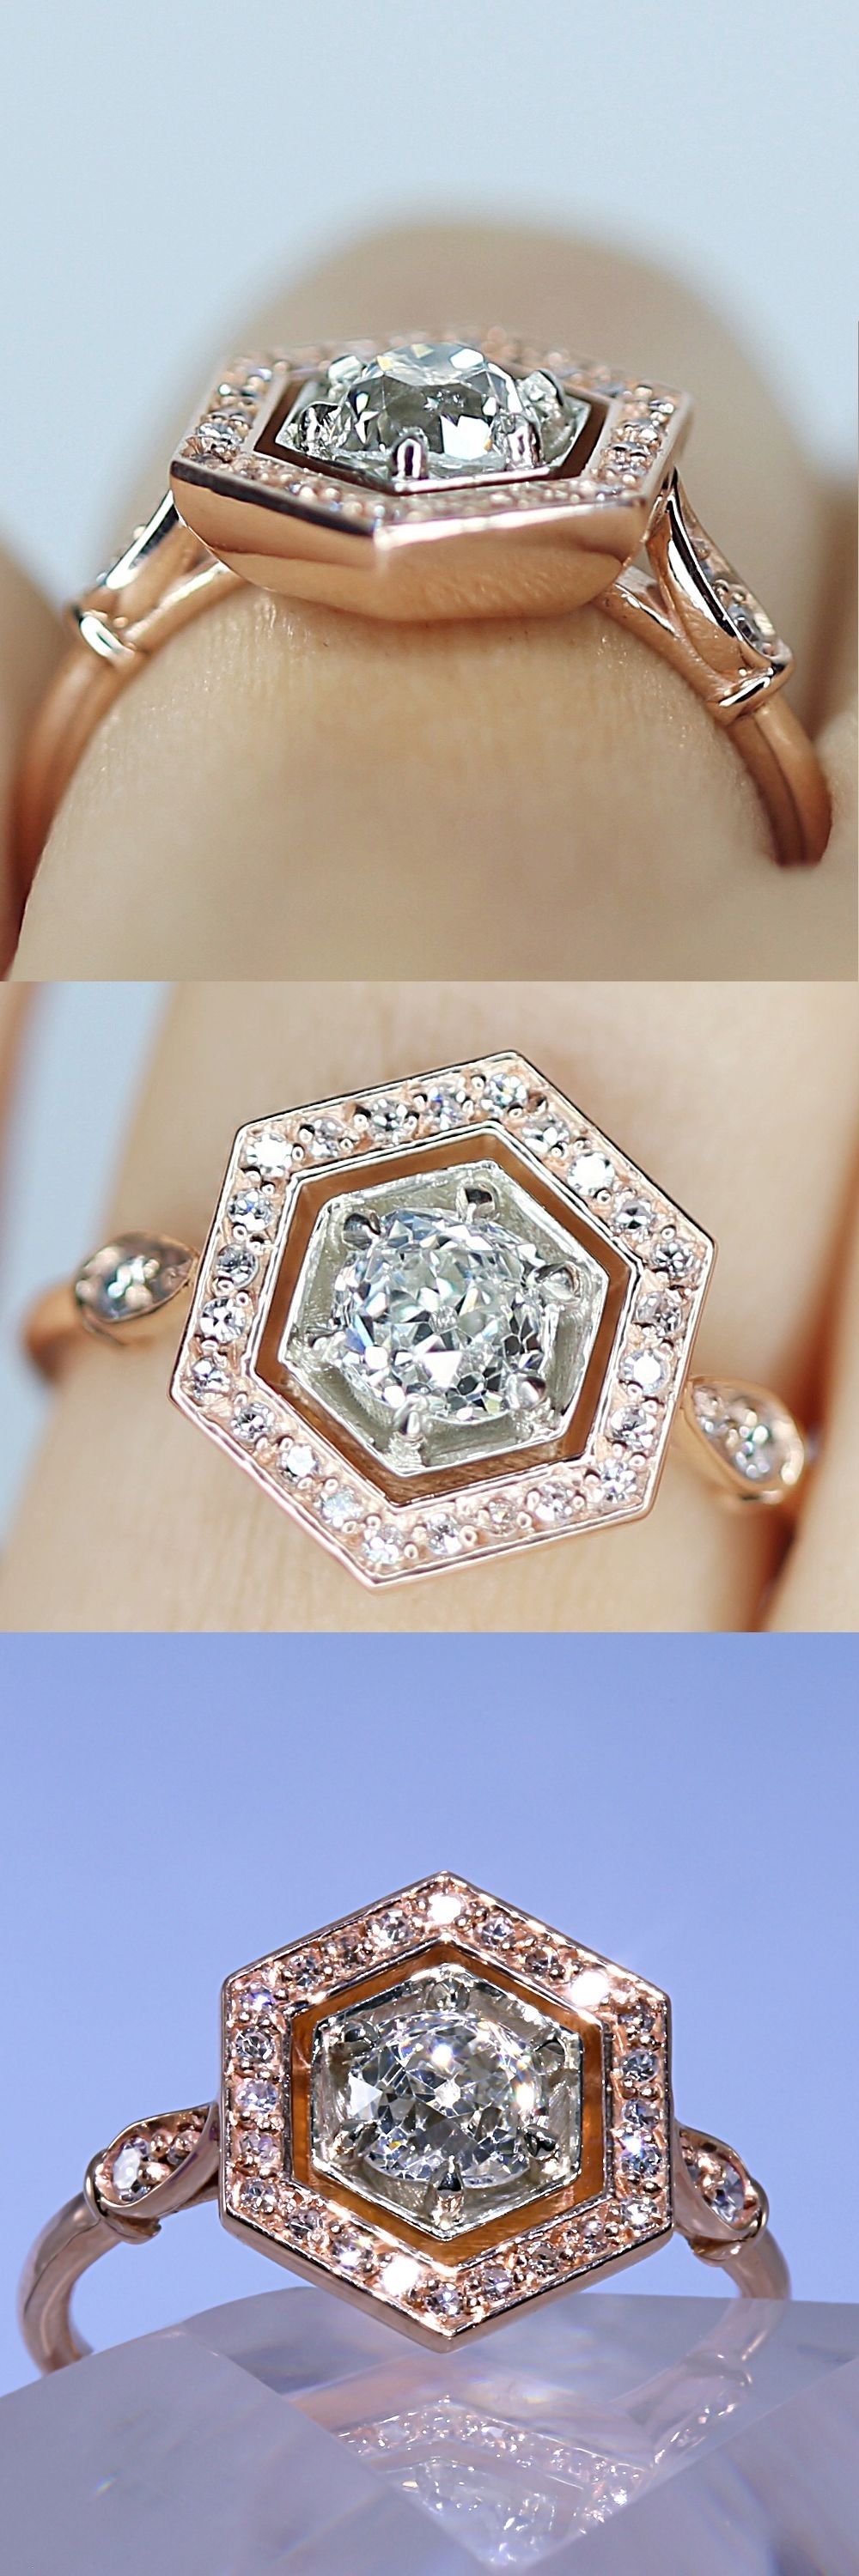 Old Mine Cut Hexagon Frame Adele Ring | Late 20th Century, Adele And Regarding Recent Diamond Hexagonal Frame Vintage Style Wedding Bands (View 8 of 15)